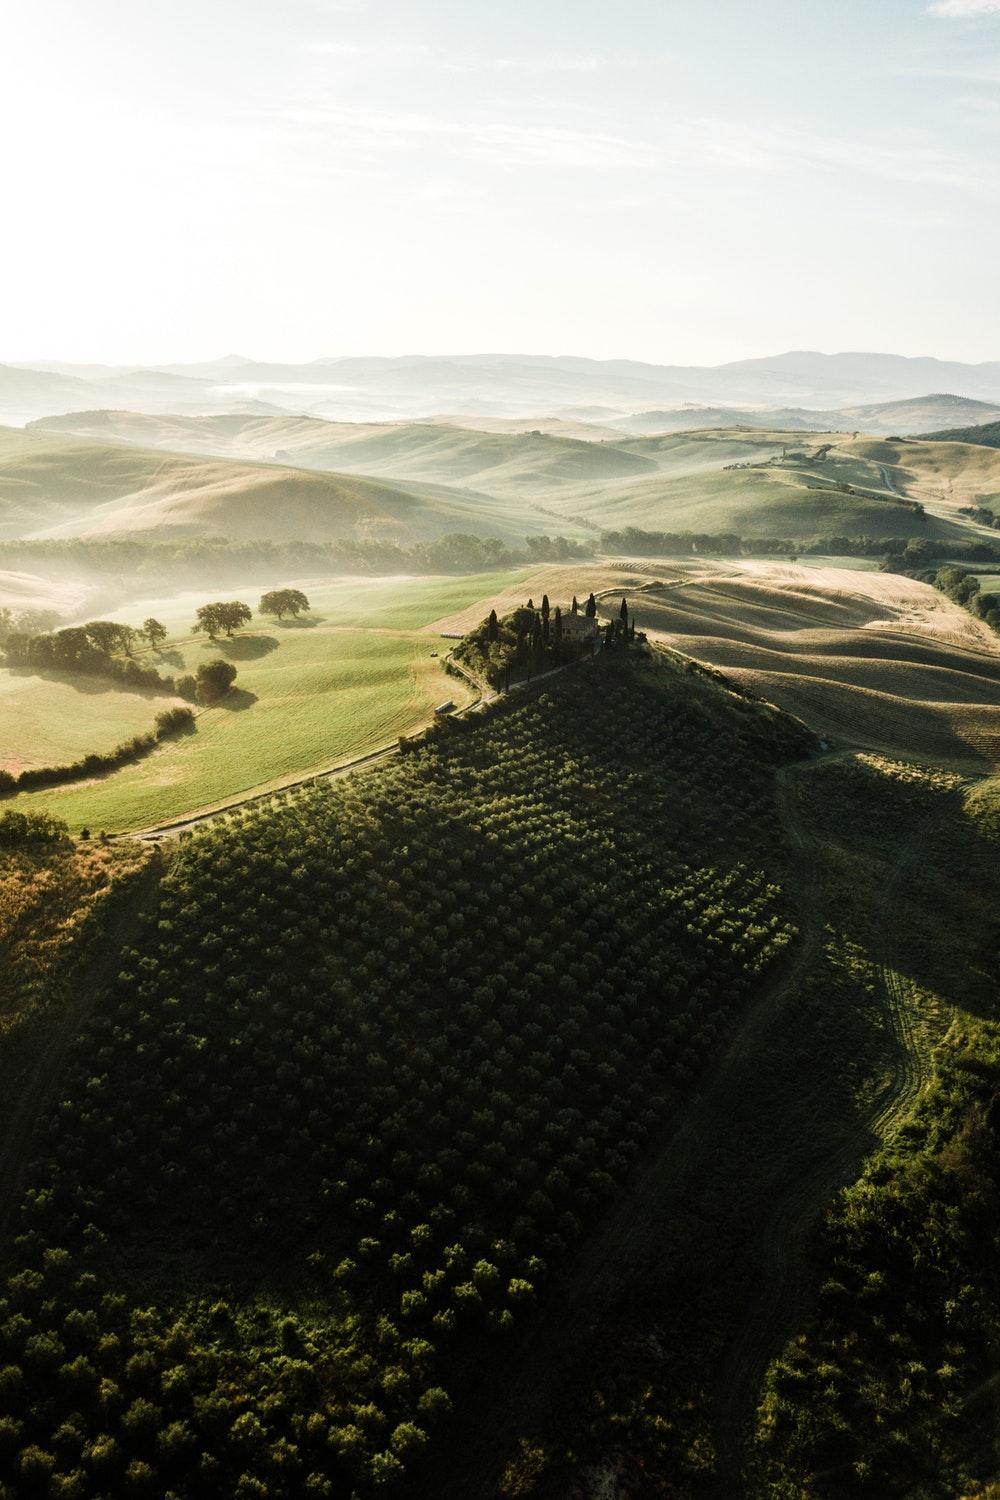 Tuscany Picture [Stunning!]. Download Free Image